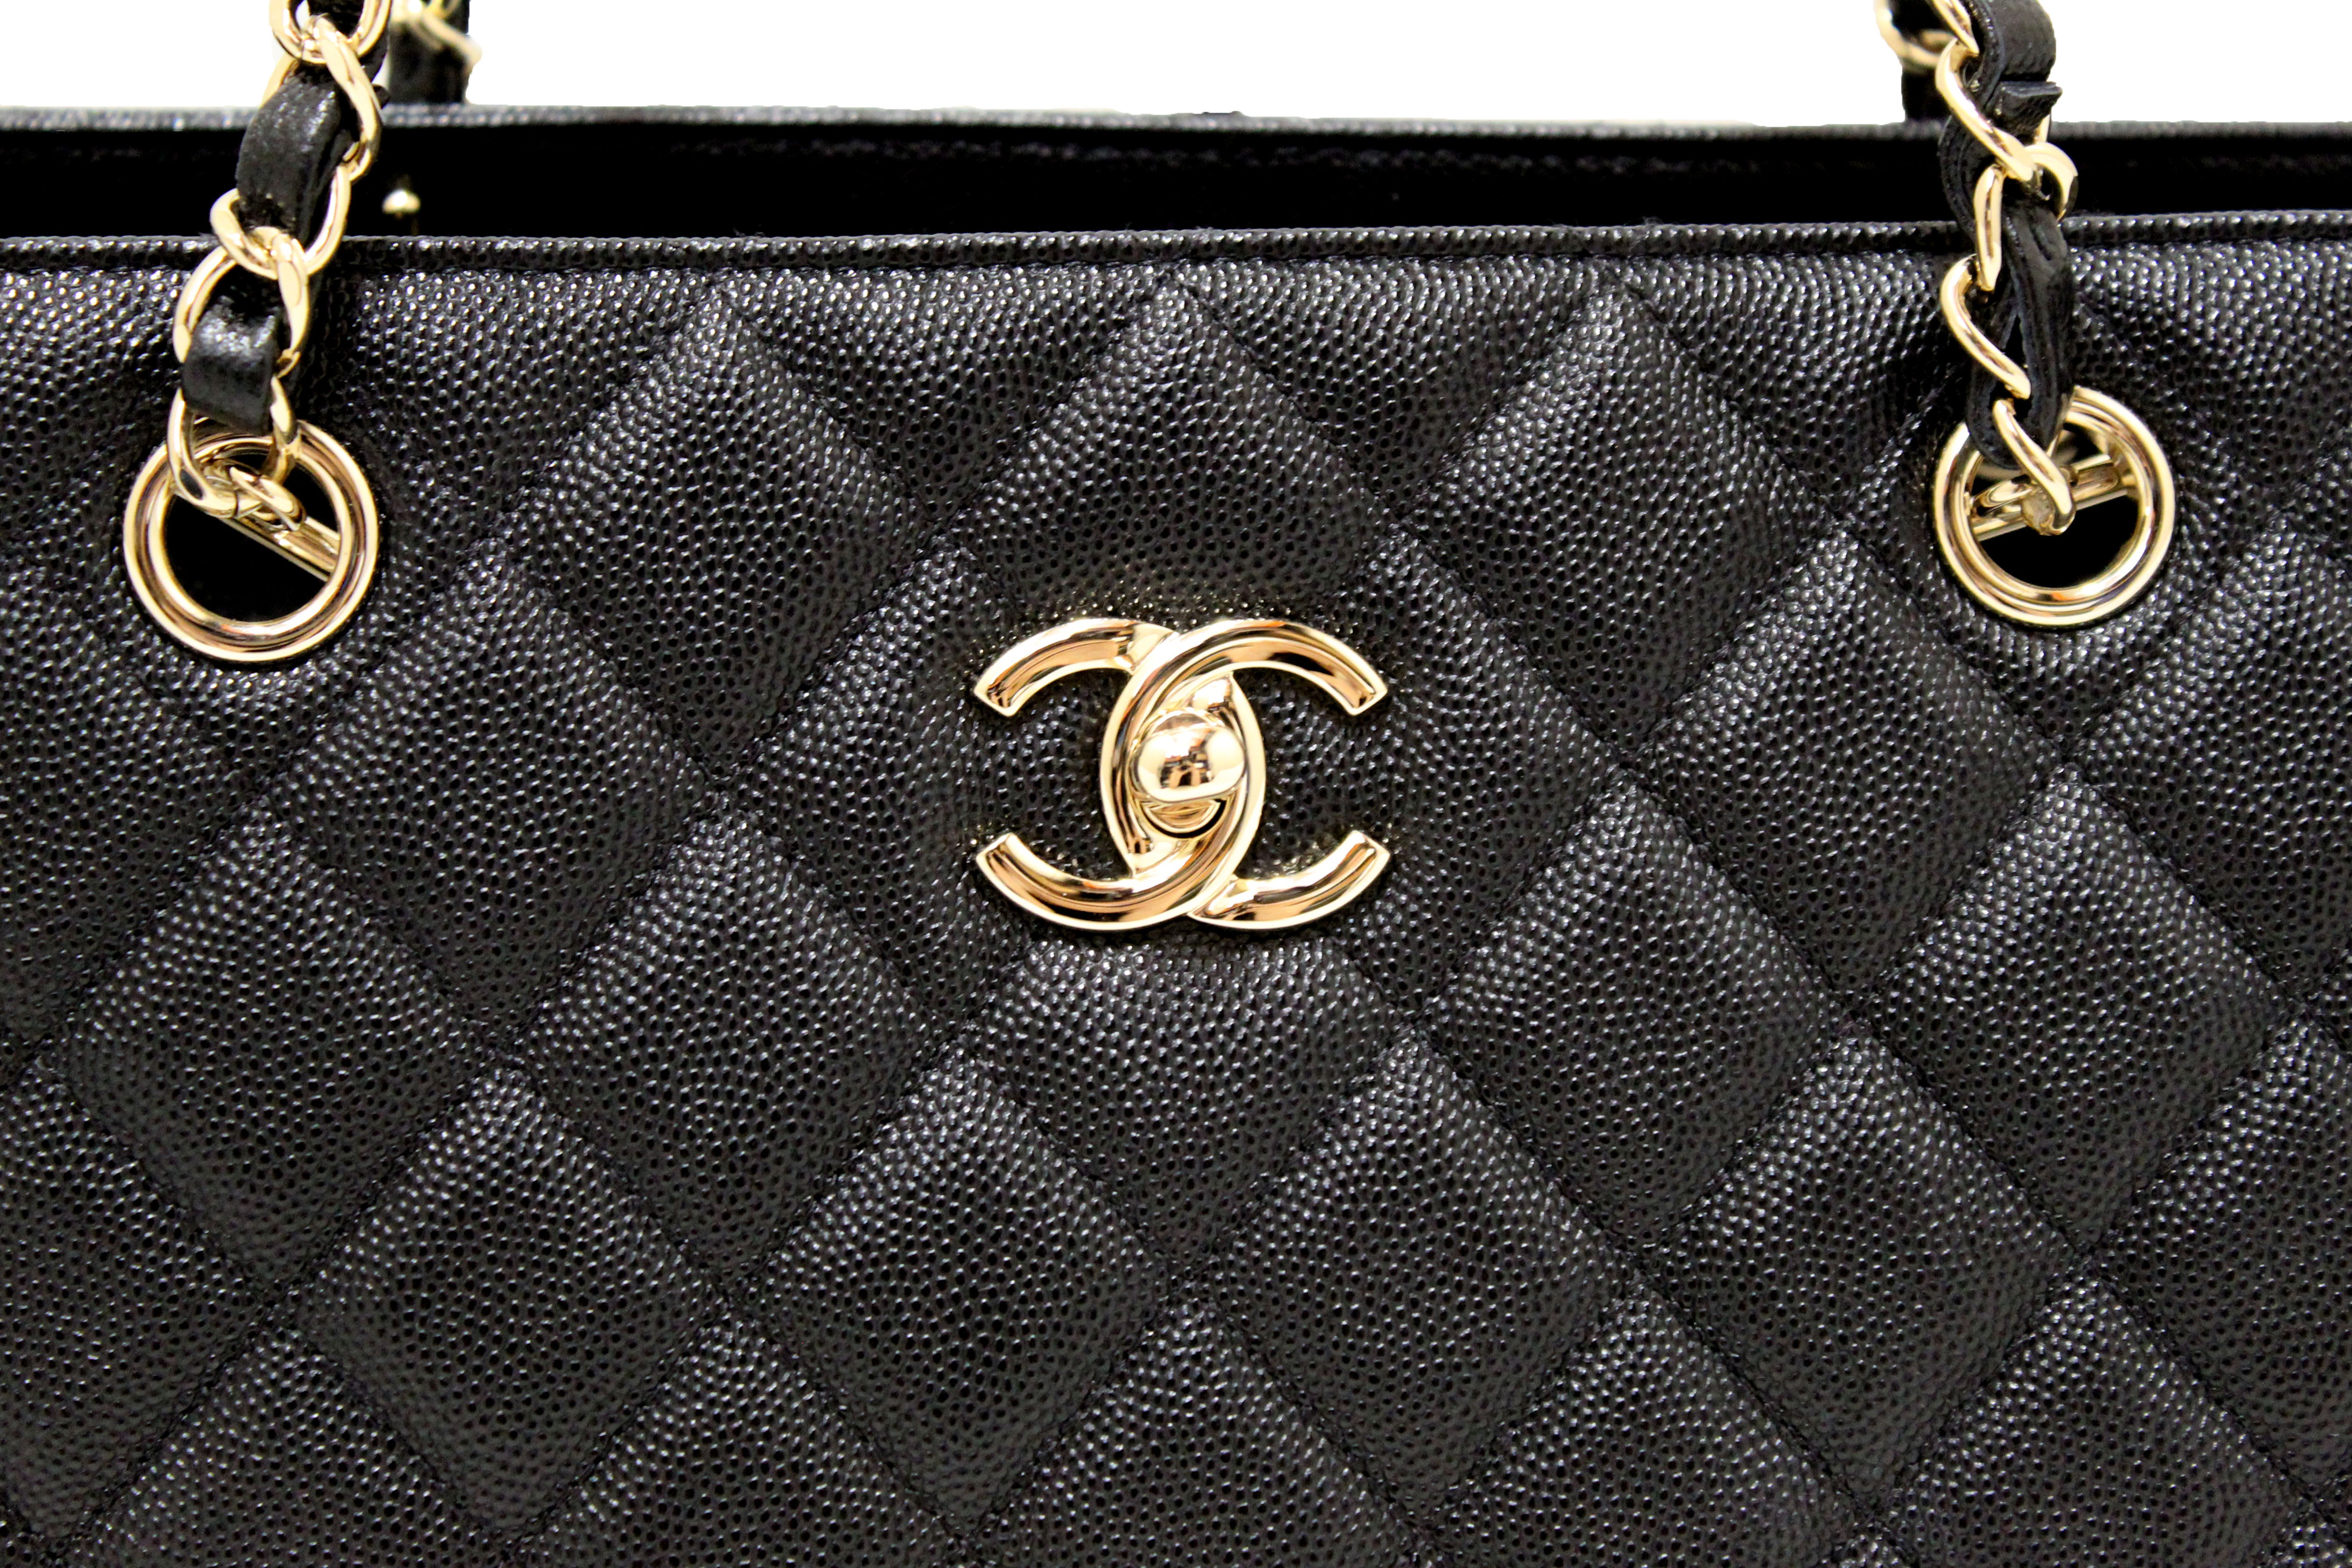 Authentic Chanel Black Quilted Caviar Leather Large Shopping Tote